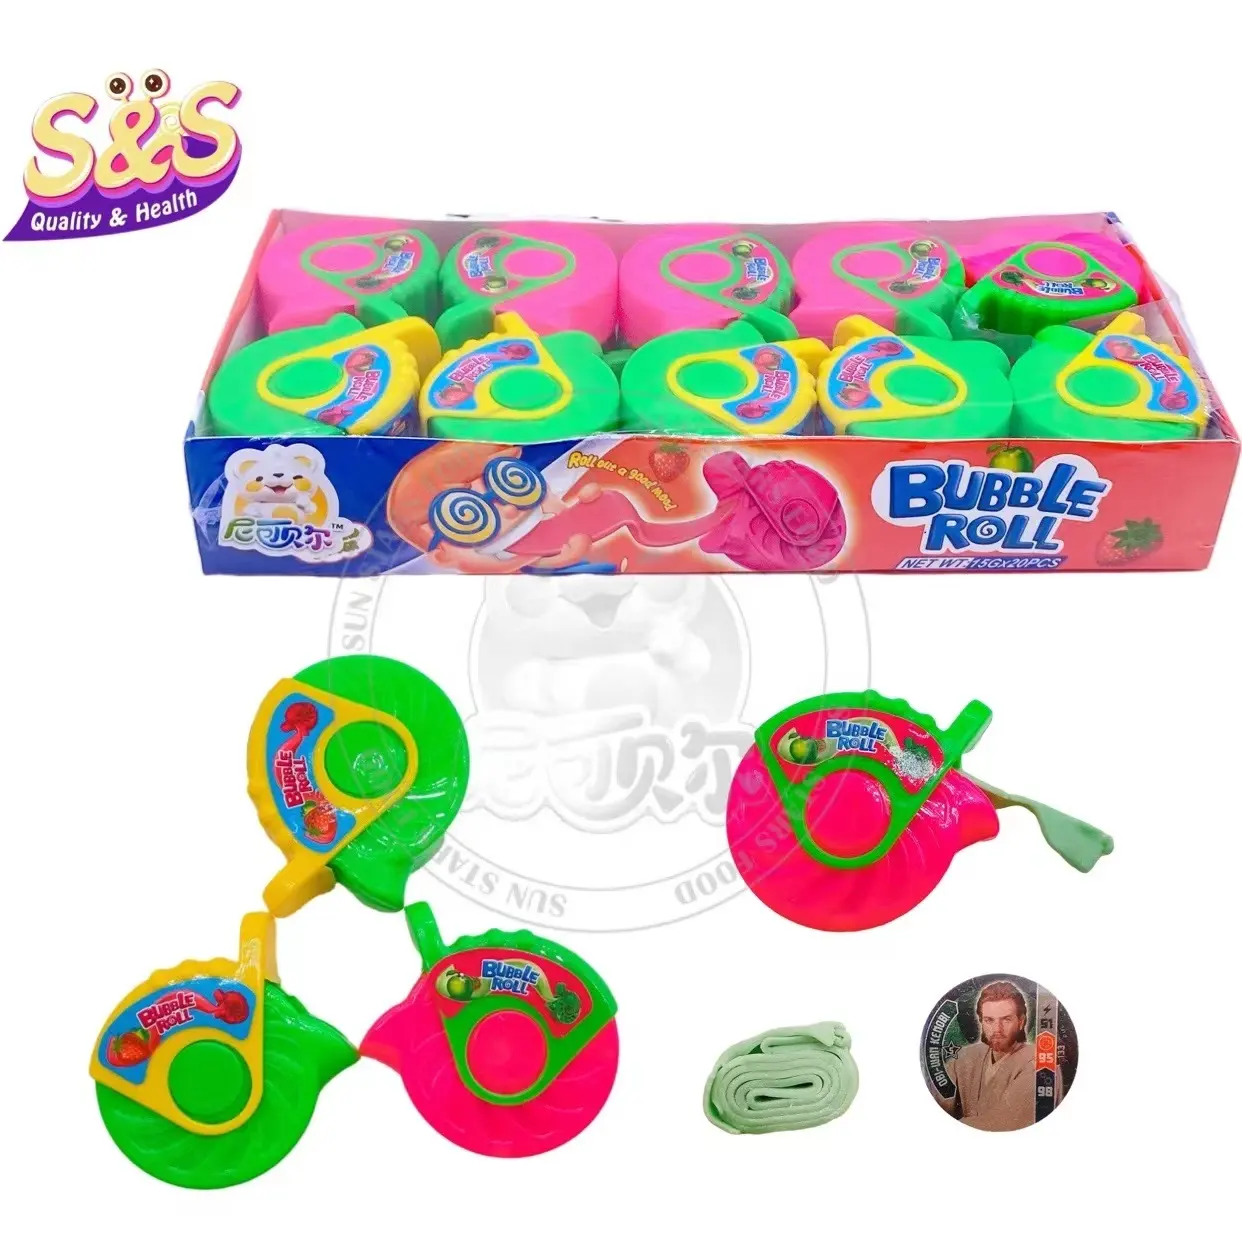 China Toy Bubble Fruit Flavor Crazy Roll Bubble Gum Tape Gum Candy Chewing Gum